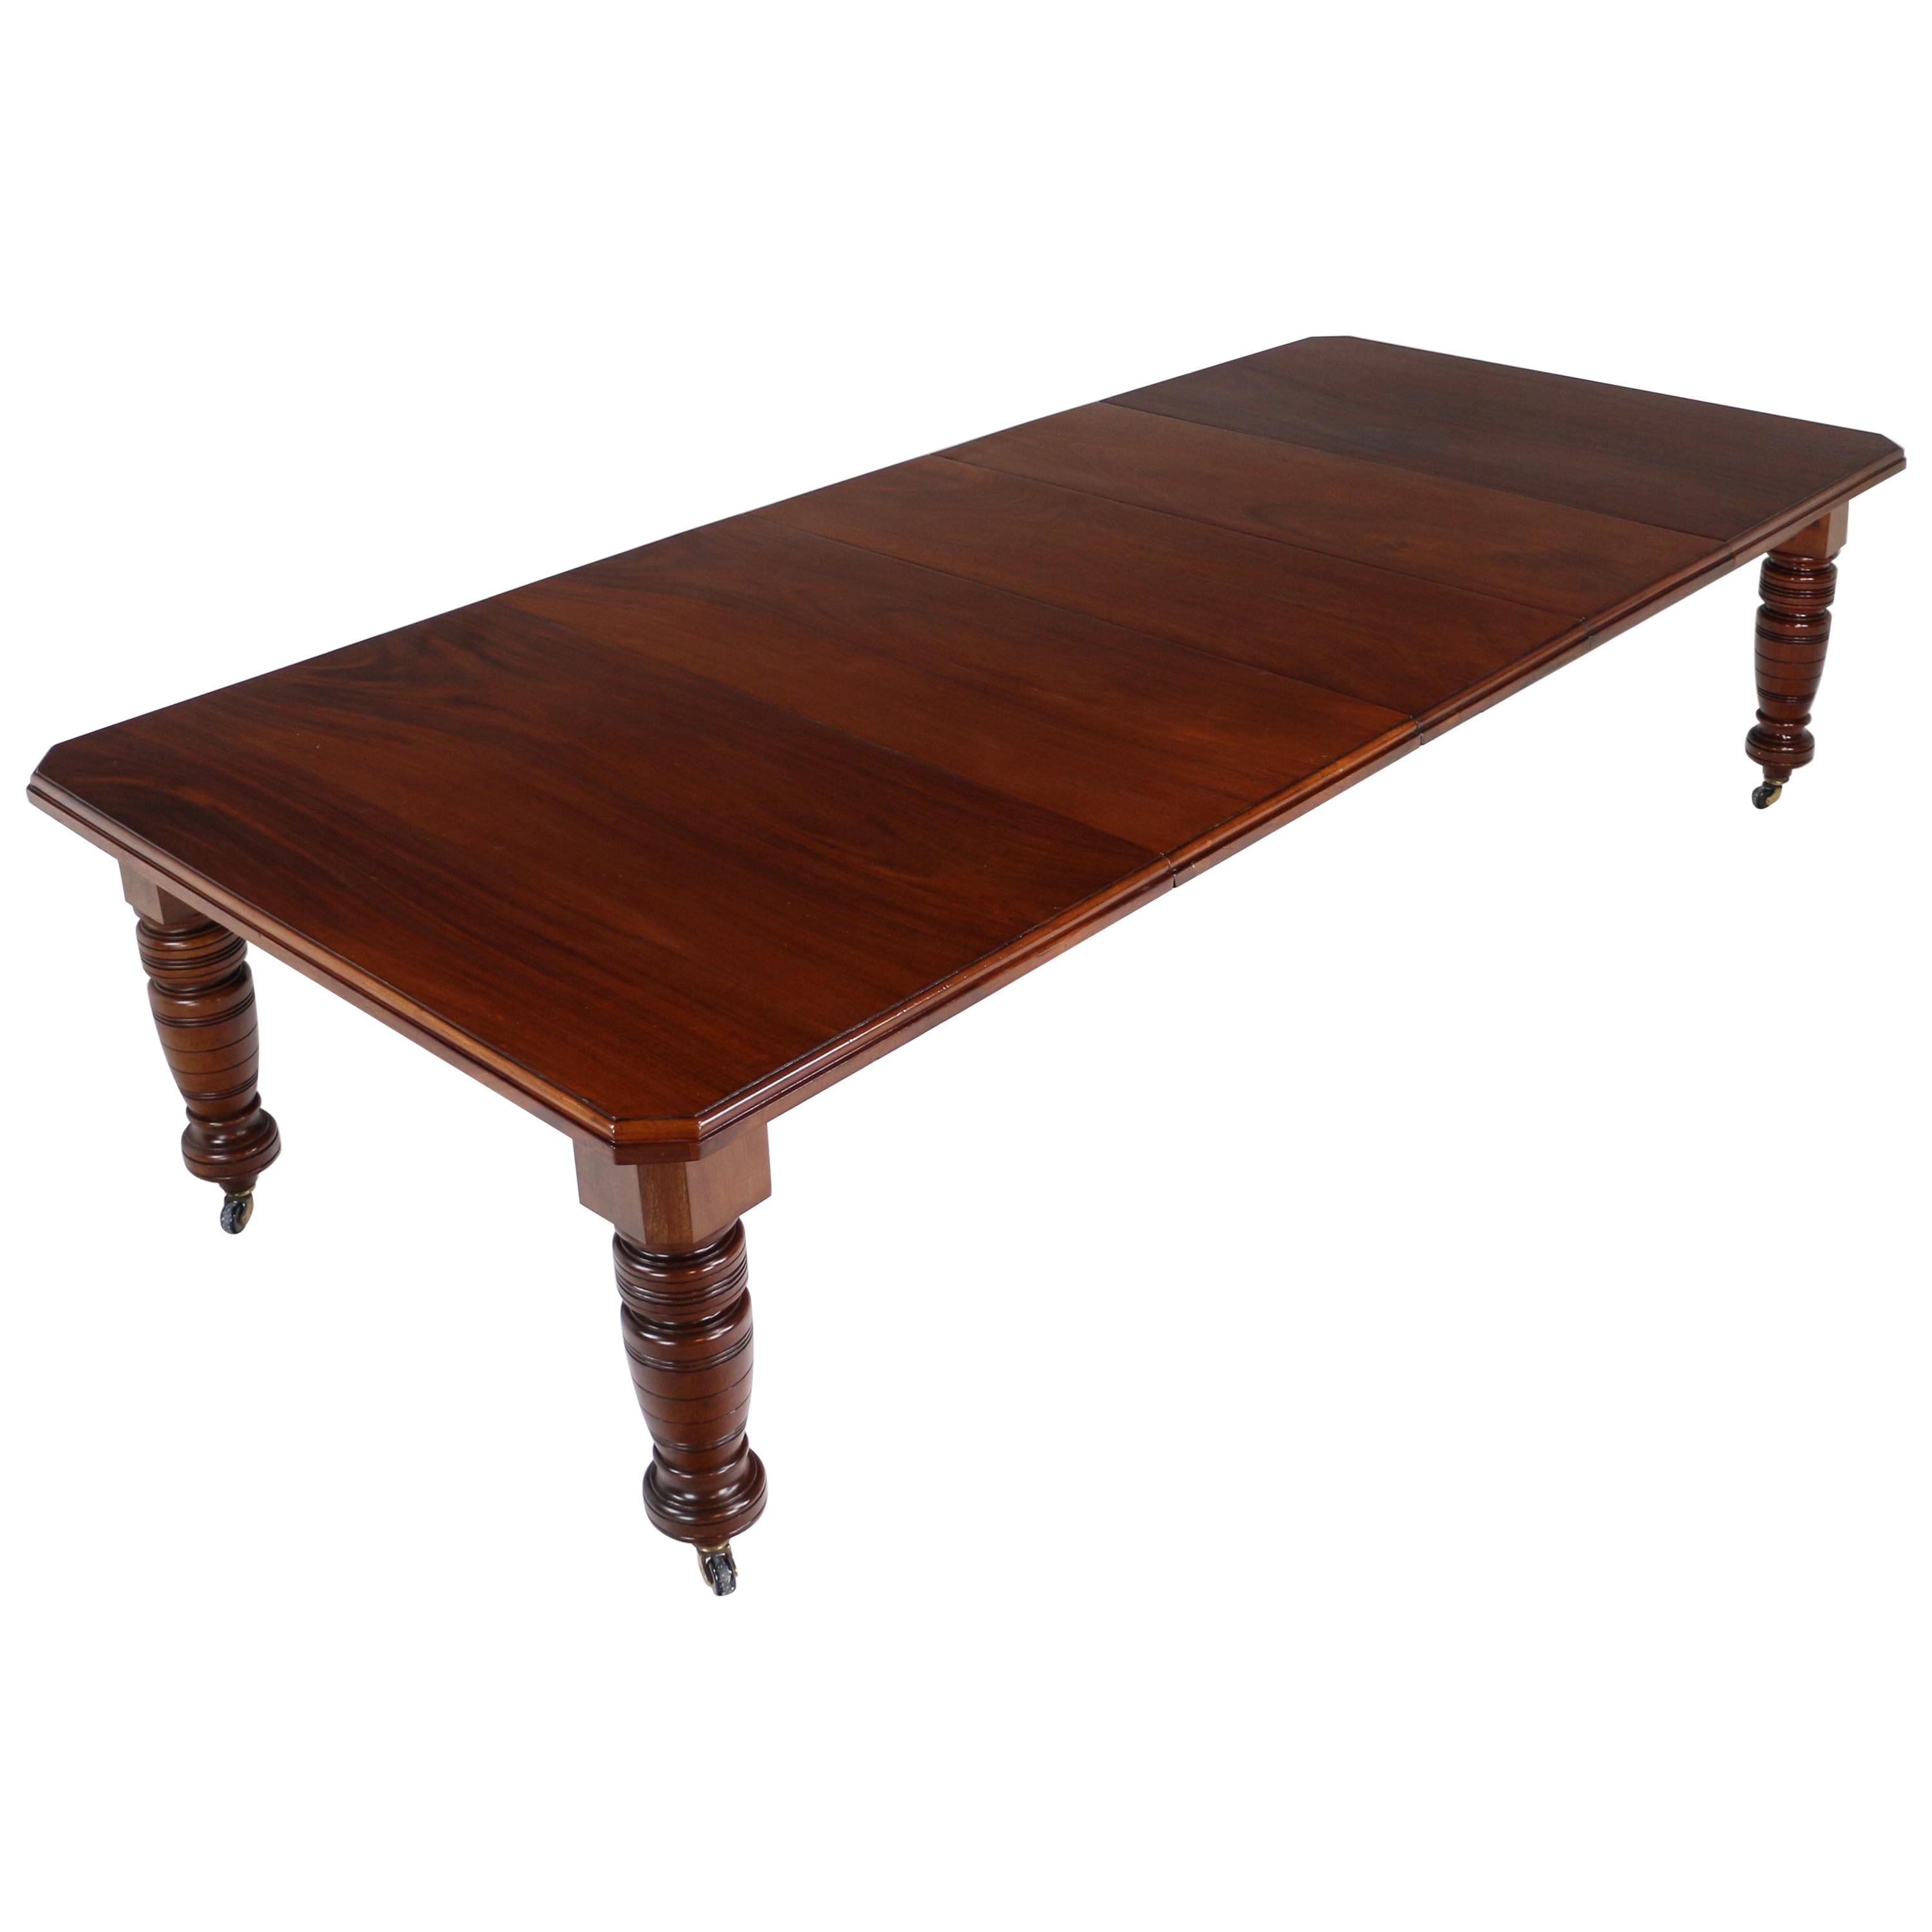 Antique English Victorian Mahogany Extending Dining Table with Three Leaves